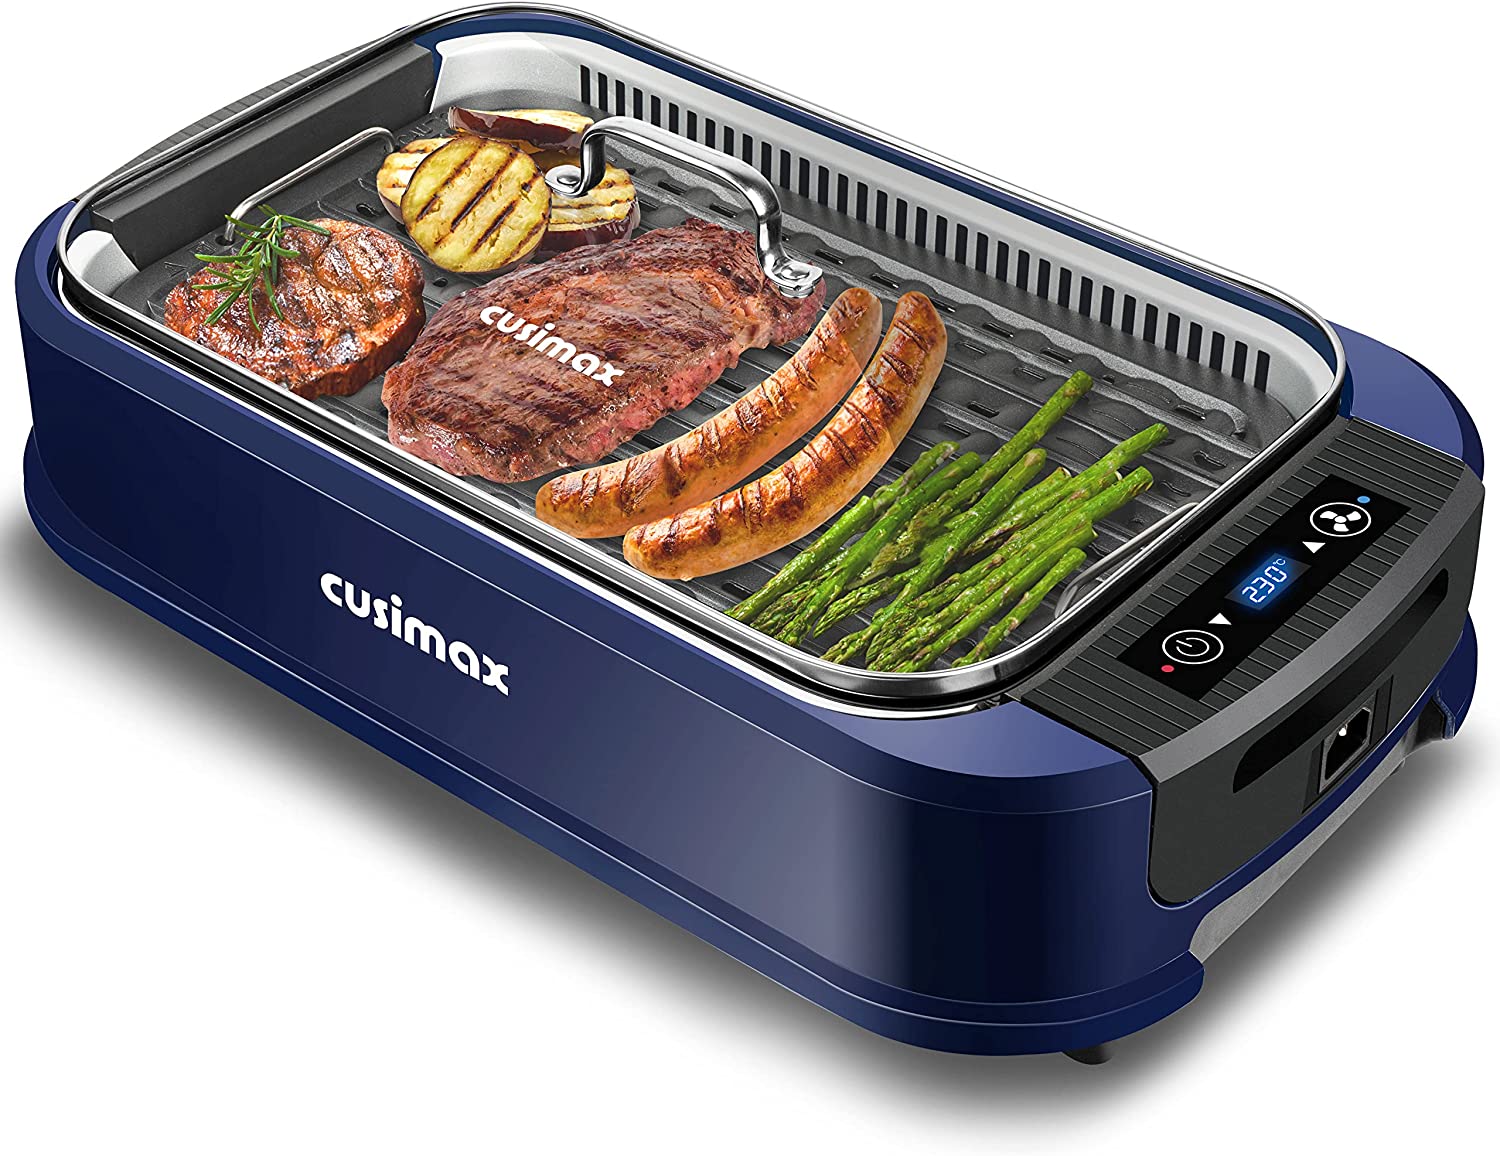 CUSIMAX 1500 W Electric Grill with Lid Touchscreen Table Grill Electric with Temperature Control, Turbo Smoking Technology, Oil Catcher and Removable Grill Plate Cast Iron Steak Grill